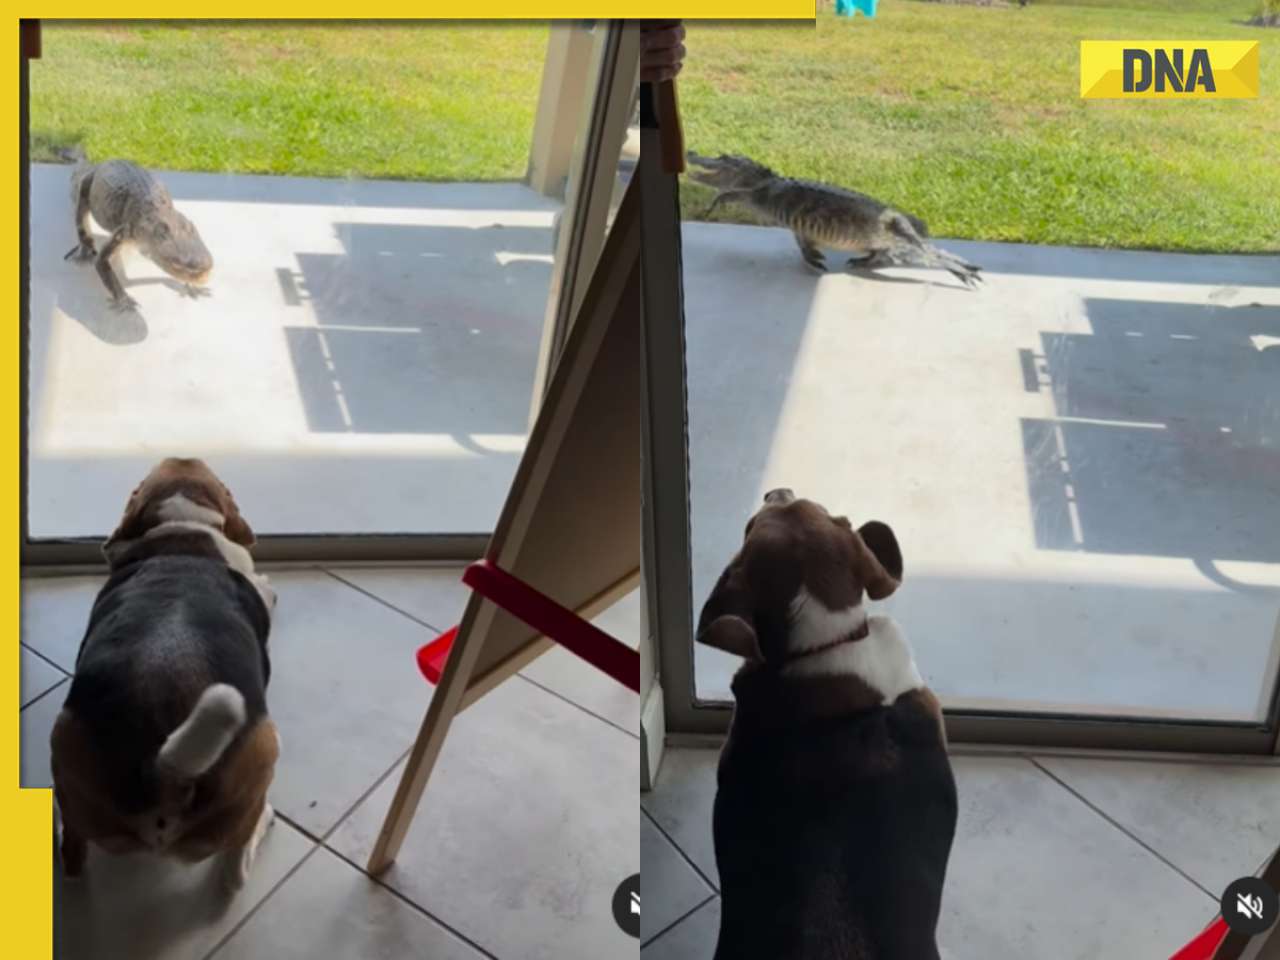 Watch: Pet dog scares off alligator in viral video, internet reacts